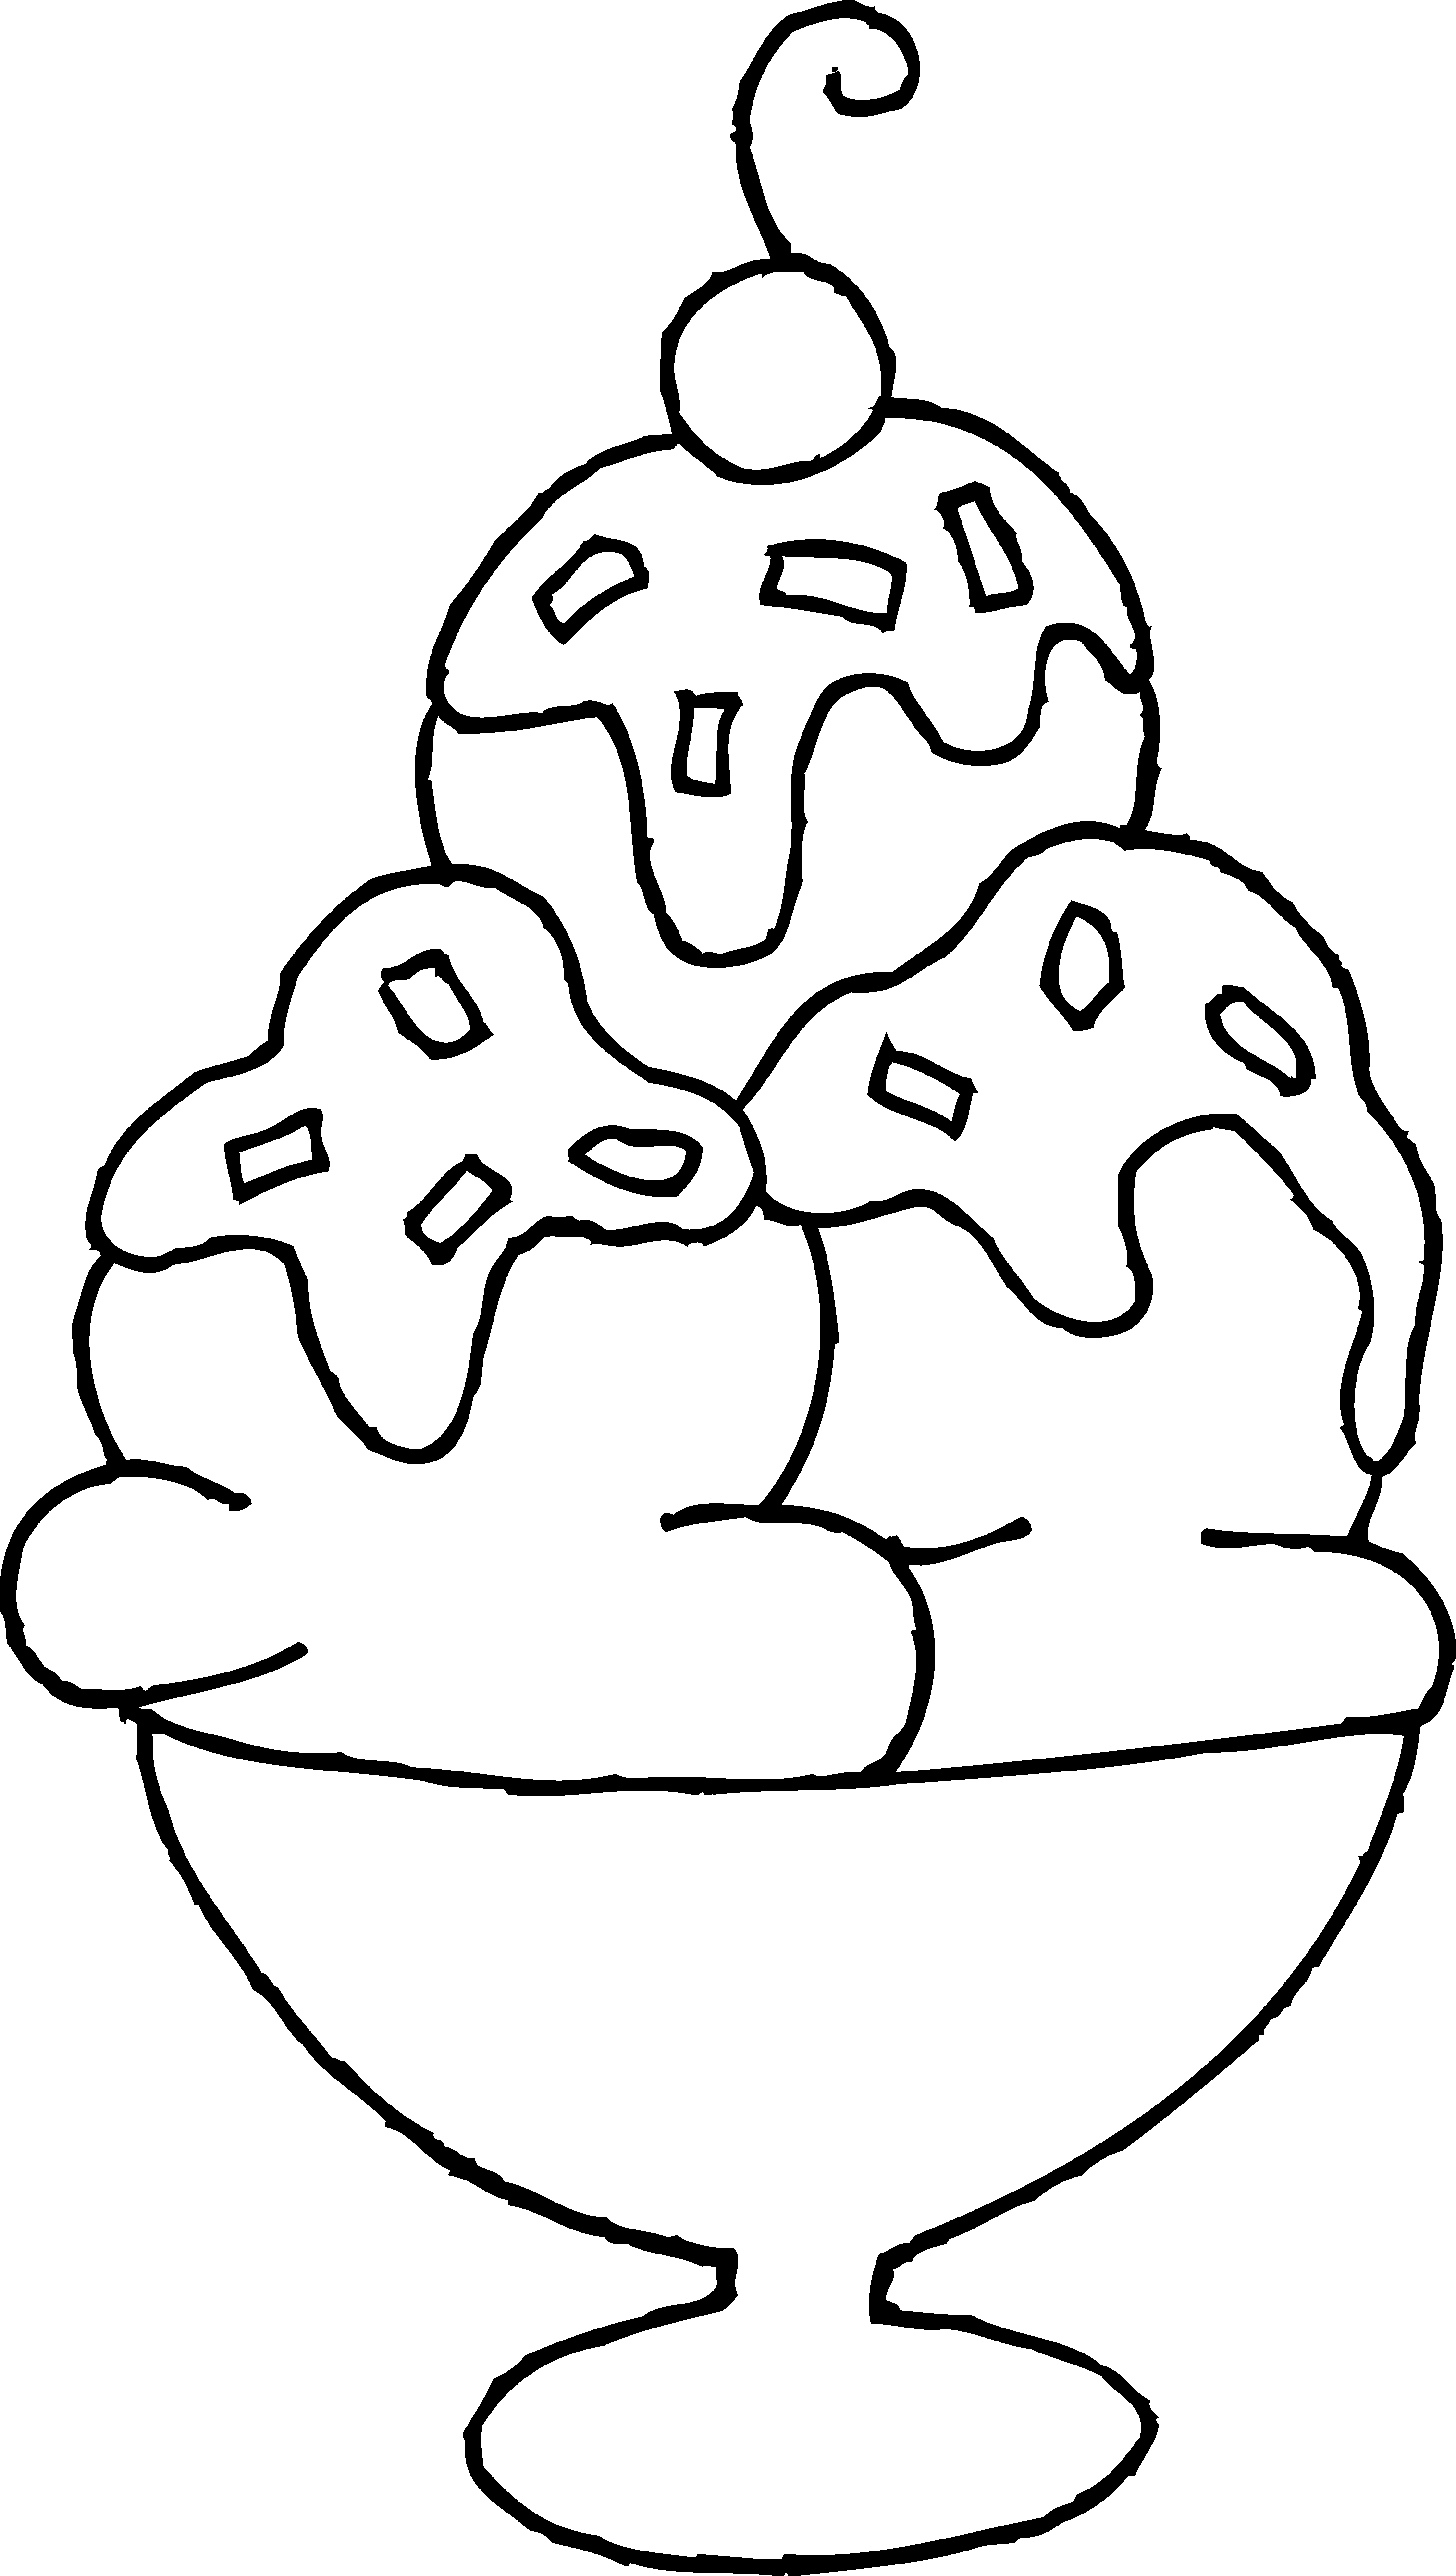 Ice Cream Sundae Printable Coloring Pages